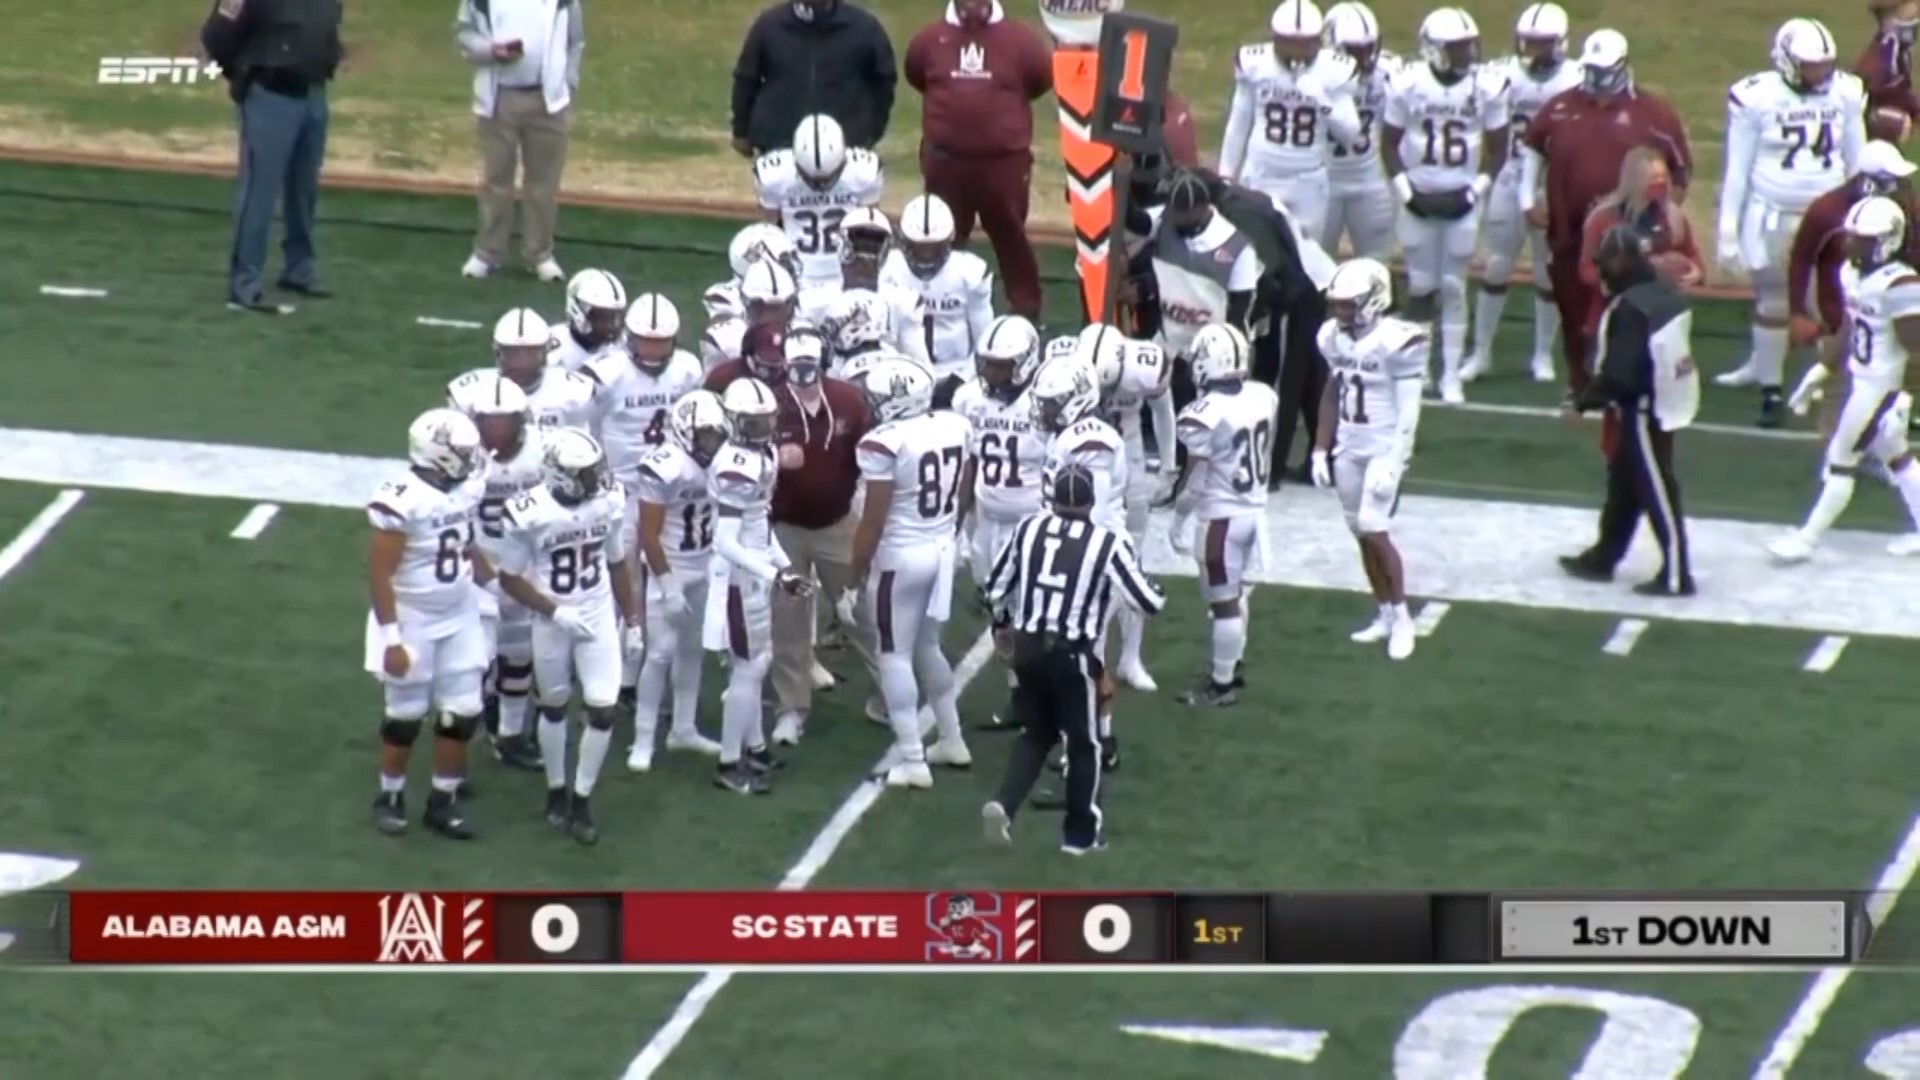 A 31-7 win by Alabama A&M over South Carolina State was enough to convince the FCS HBCU coaches that the Bulldogs deserved to be No. 1. in the BOXTOROW Coaches Poll